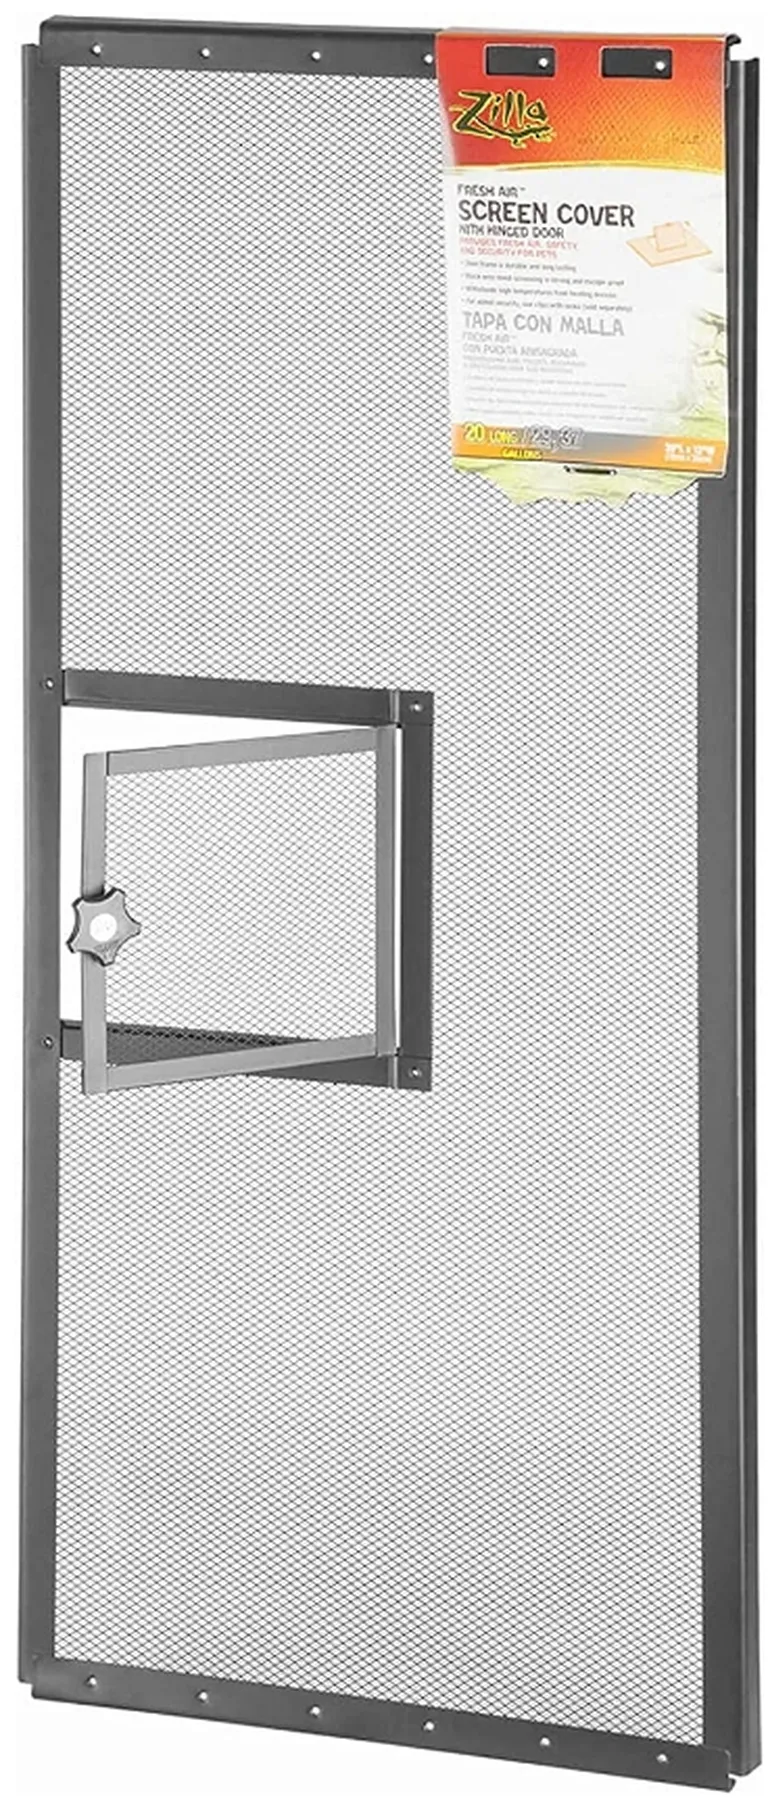 Zilla Fresh Air Screen Cover with Hinged Door 30 x 12 Inch Photo 1